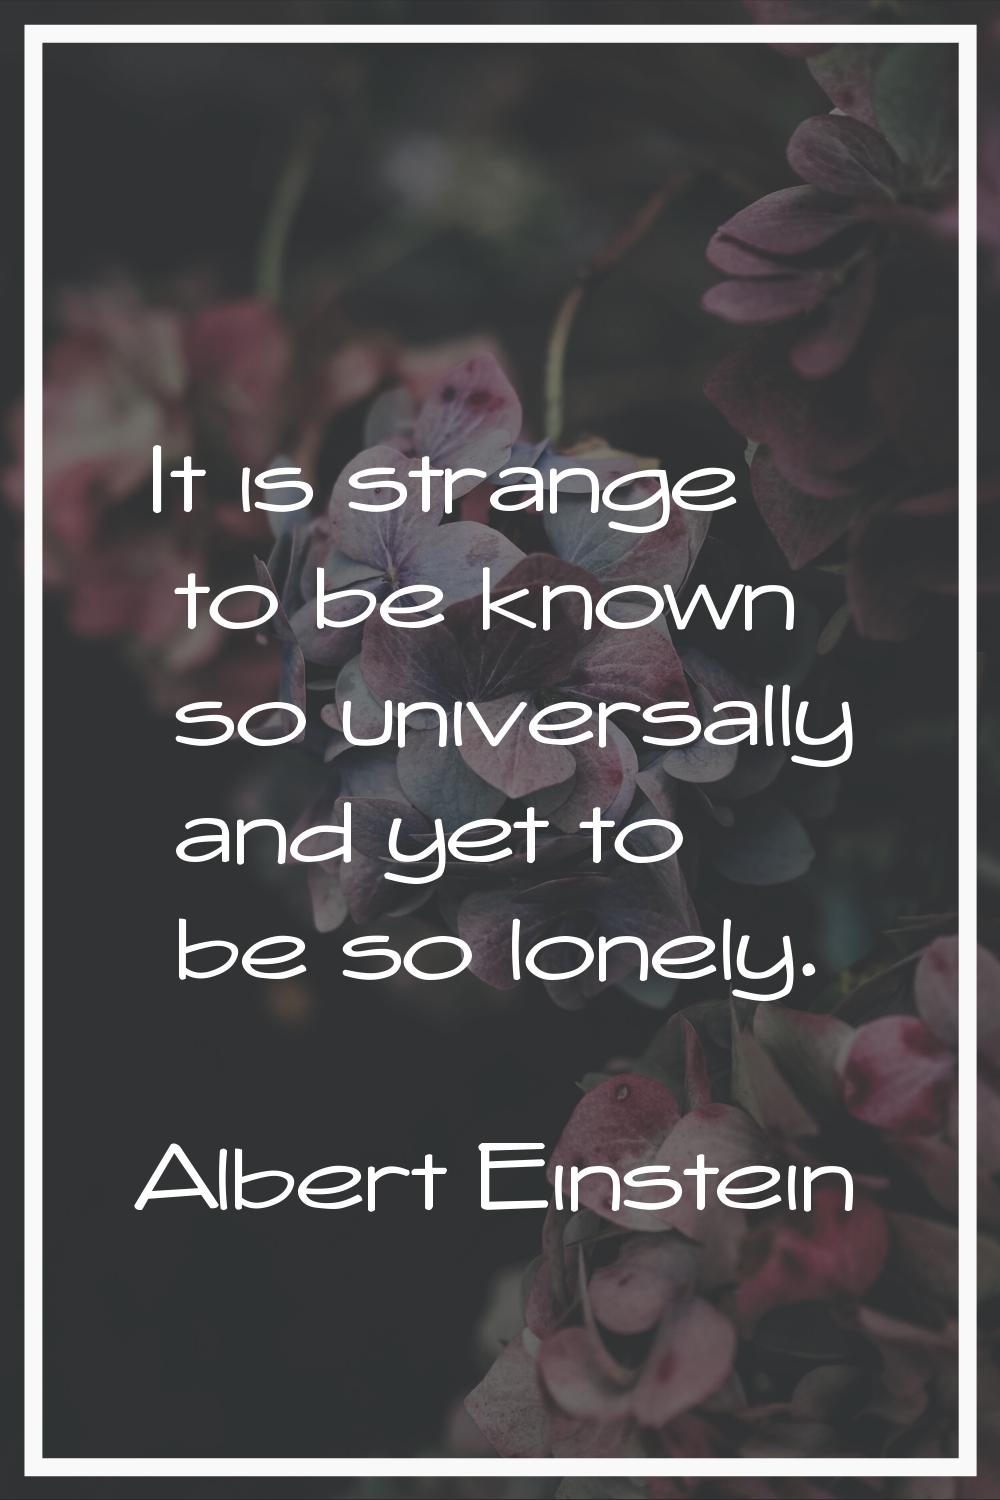 It is strange to be known so universally and yet to be so lonely.